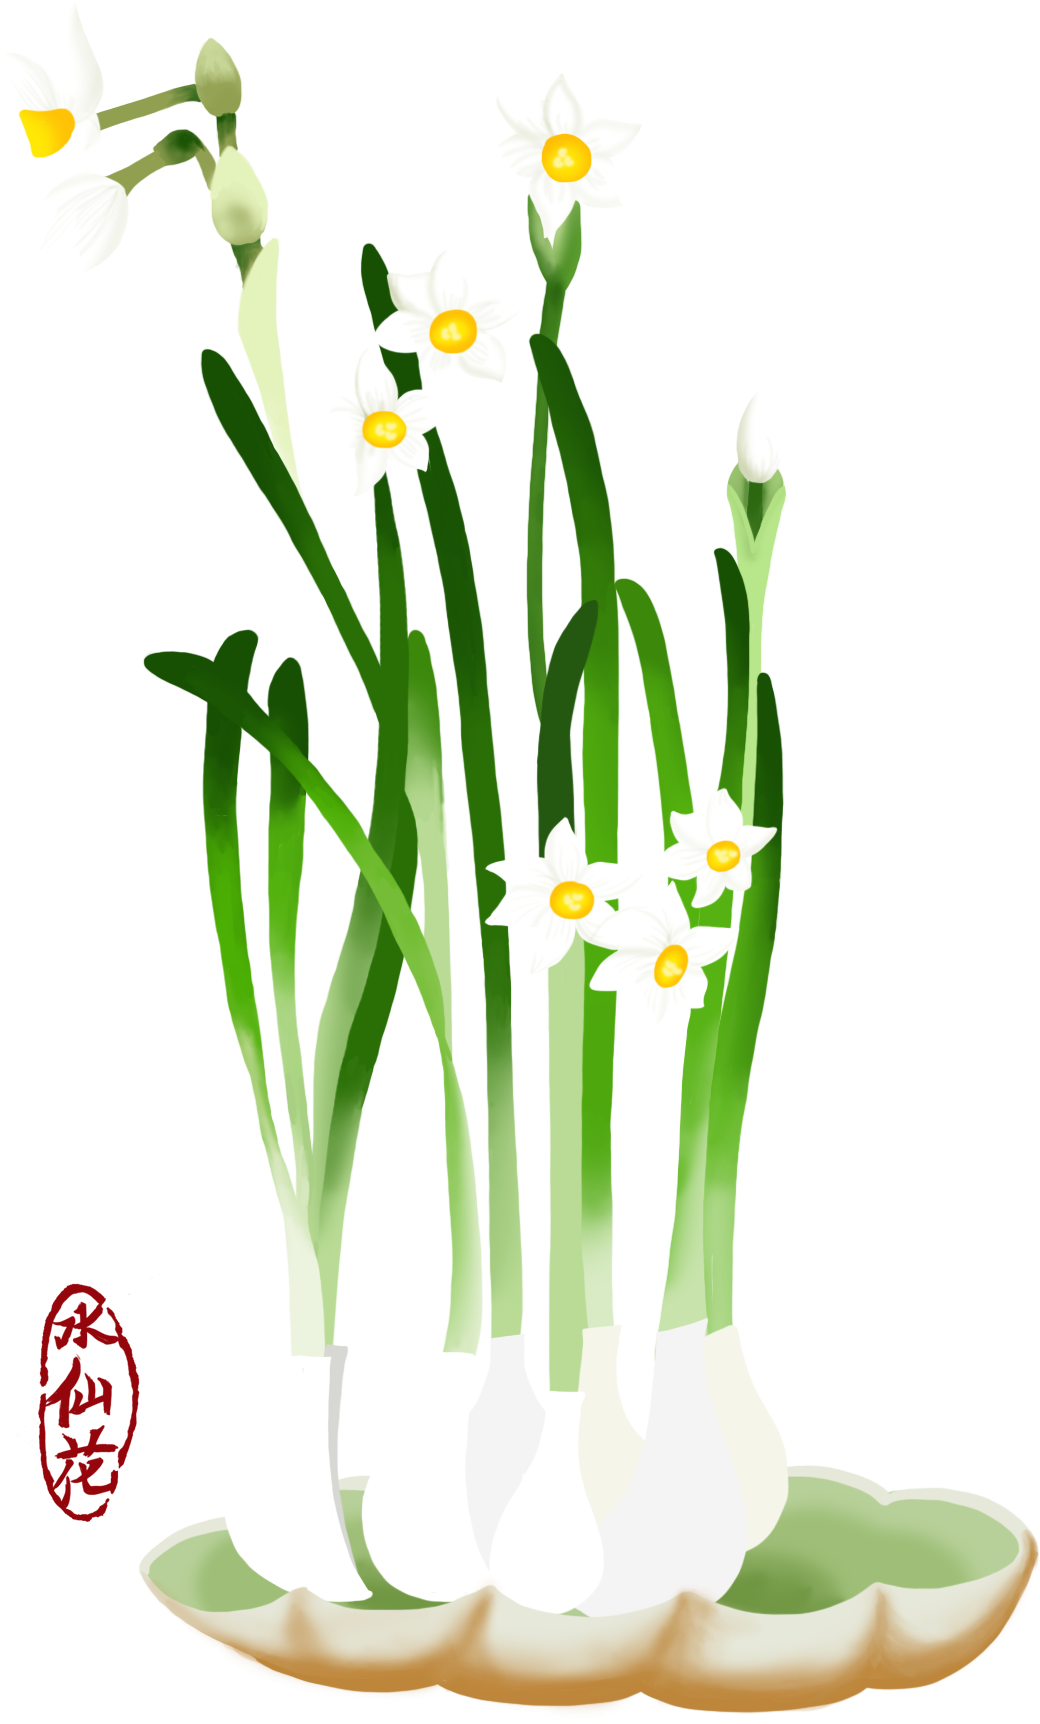 Blooming Narcissus Flowers Illustration